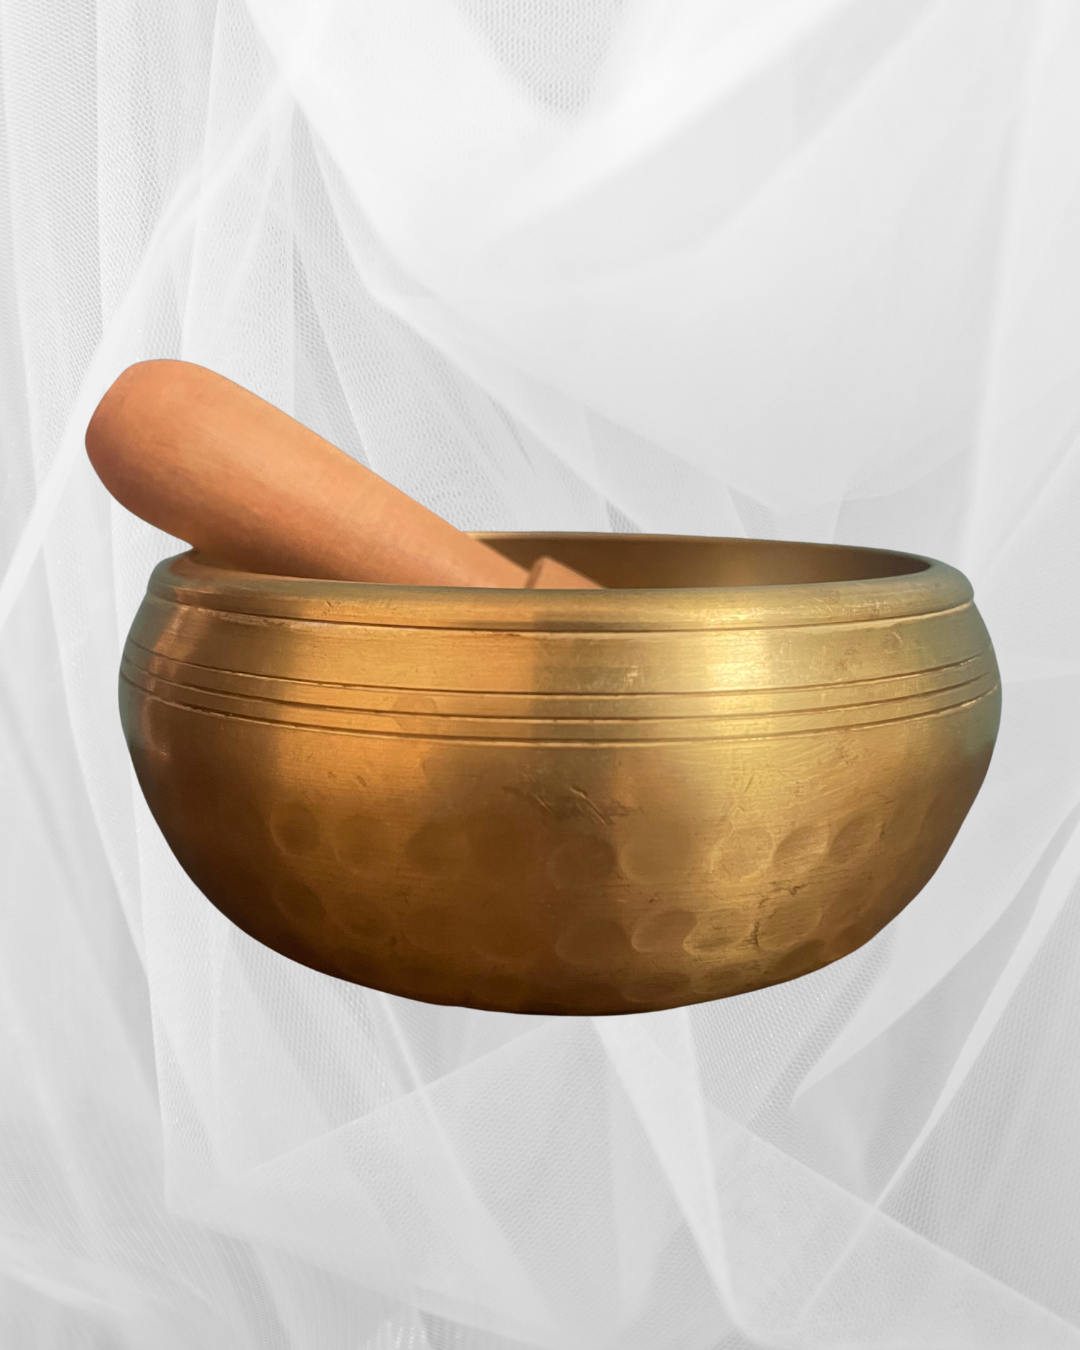 Singing Bowl - 5-metal Panchaloha Hand-hammered Bowl (4.5 inch) with Wooden Mallet